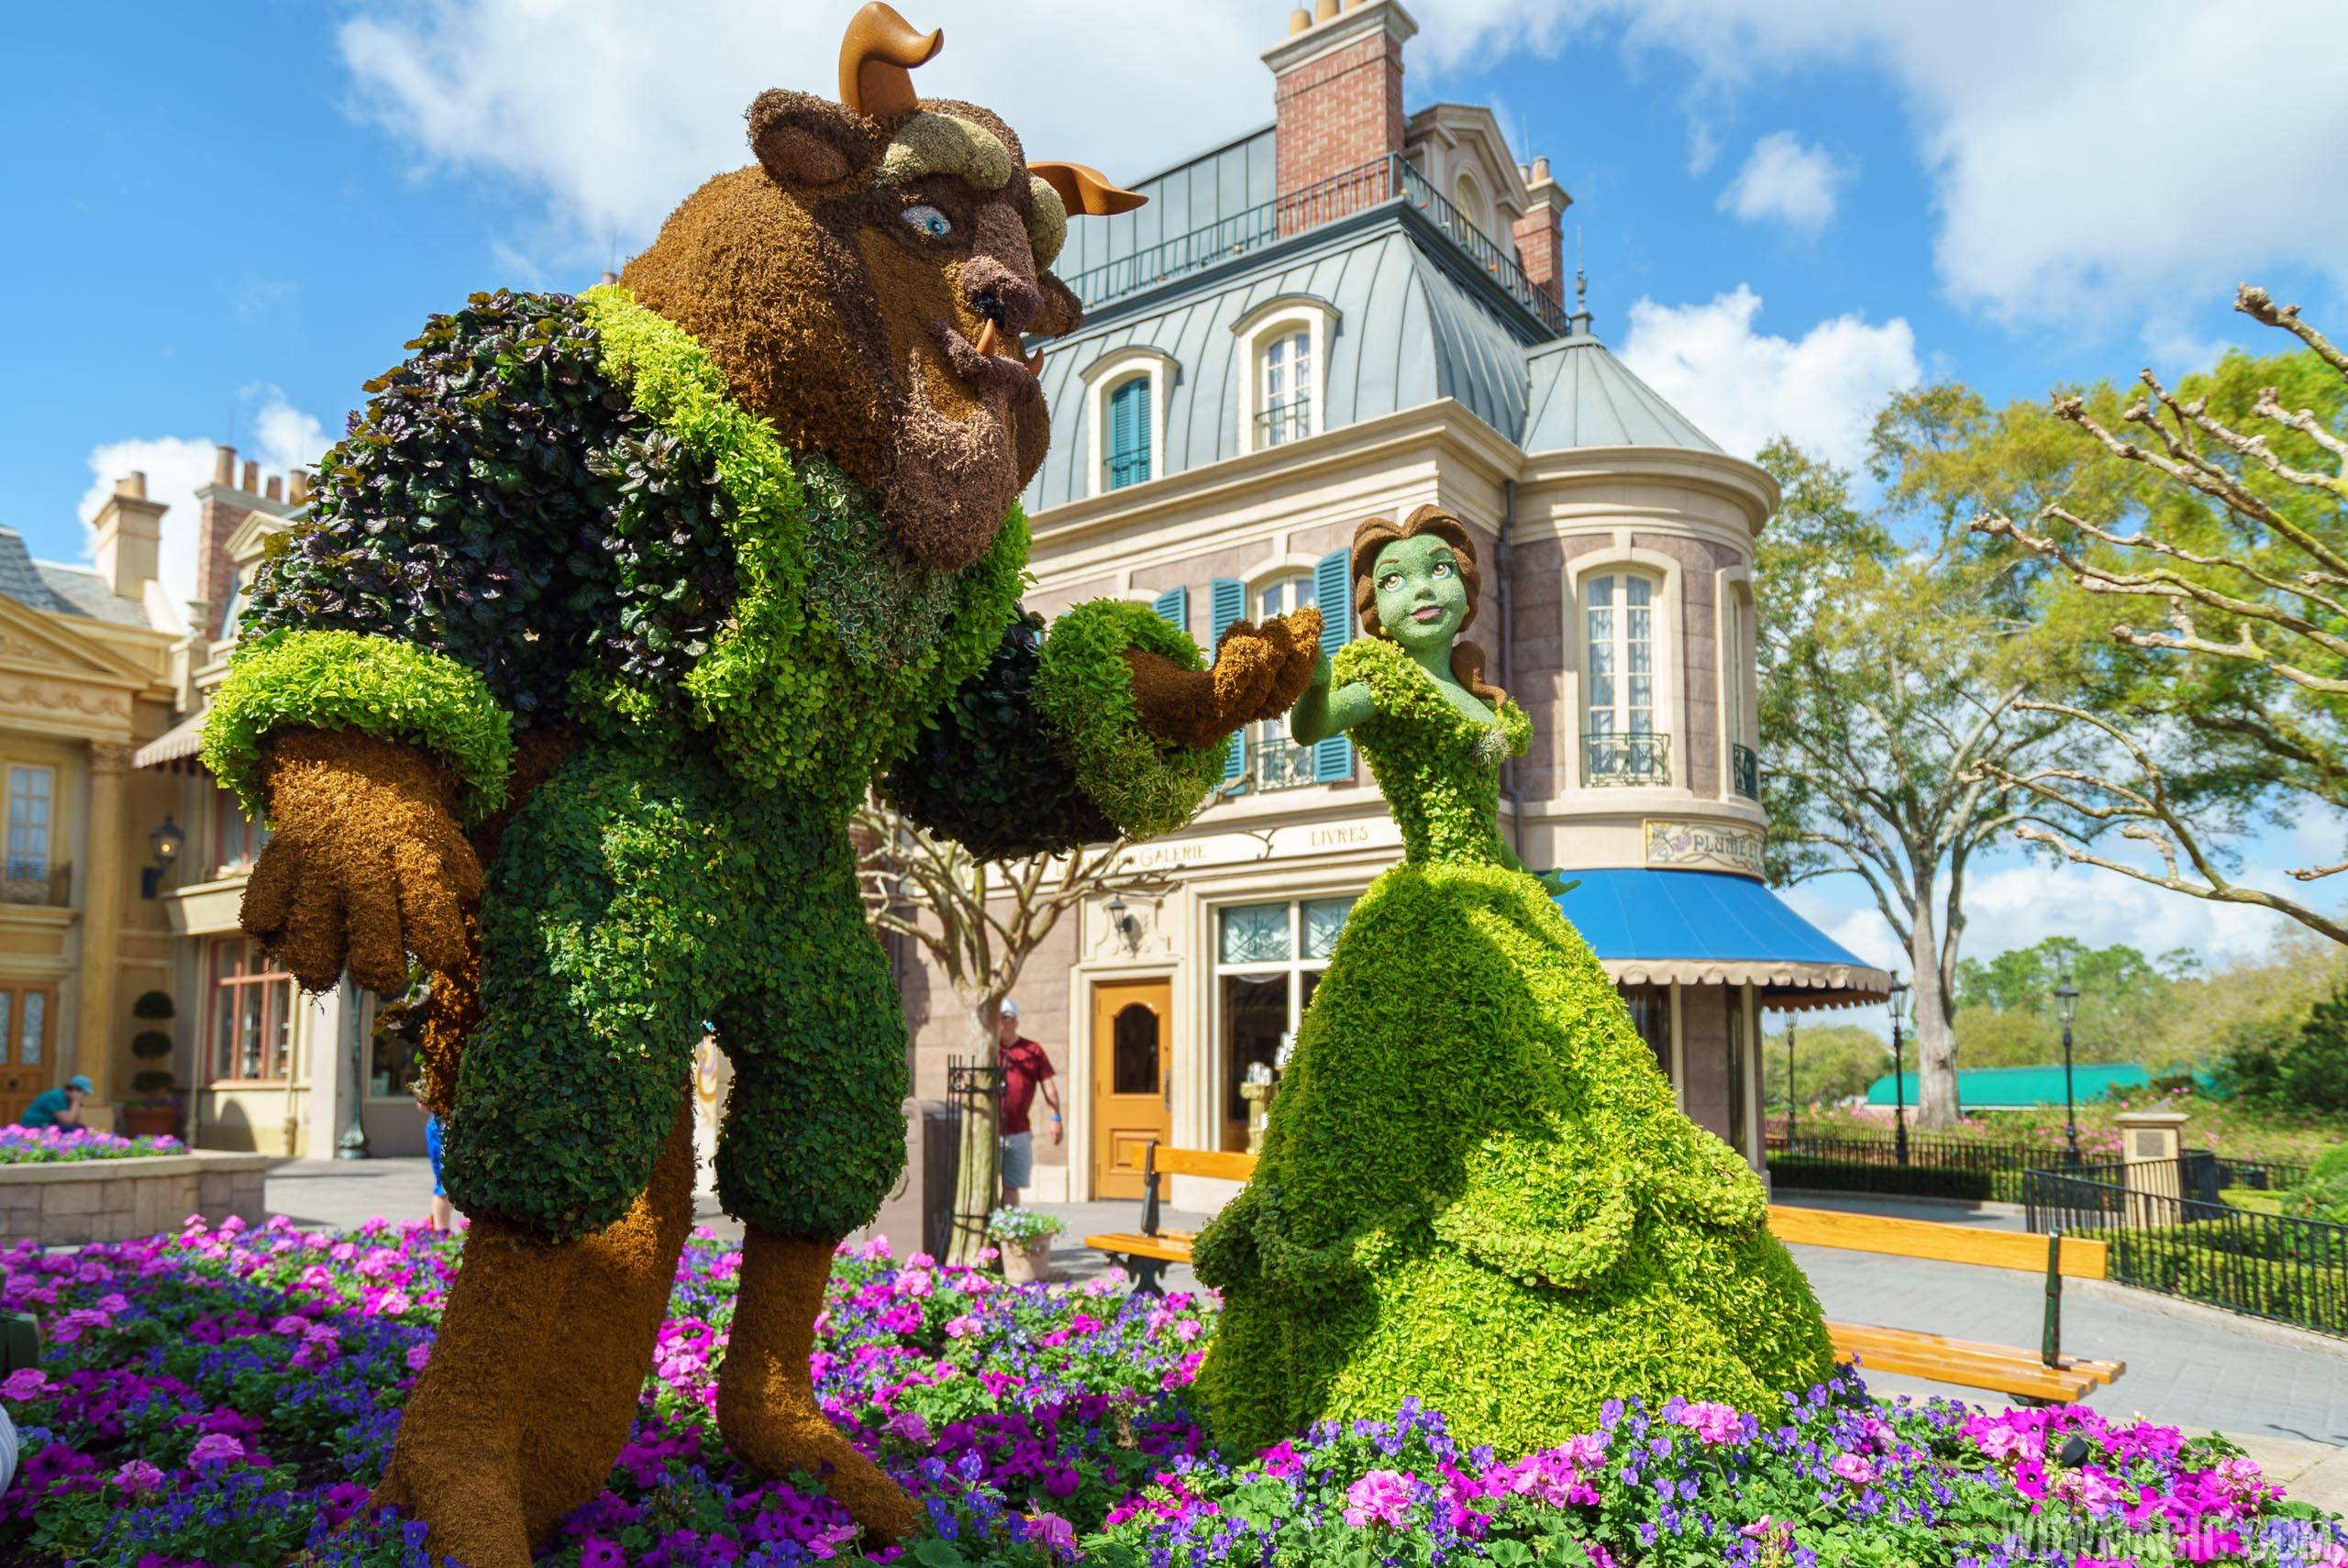 2017 Flower and Garden Festival - Belle and Beast topiaries at the France Pavilion